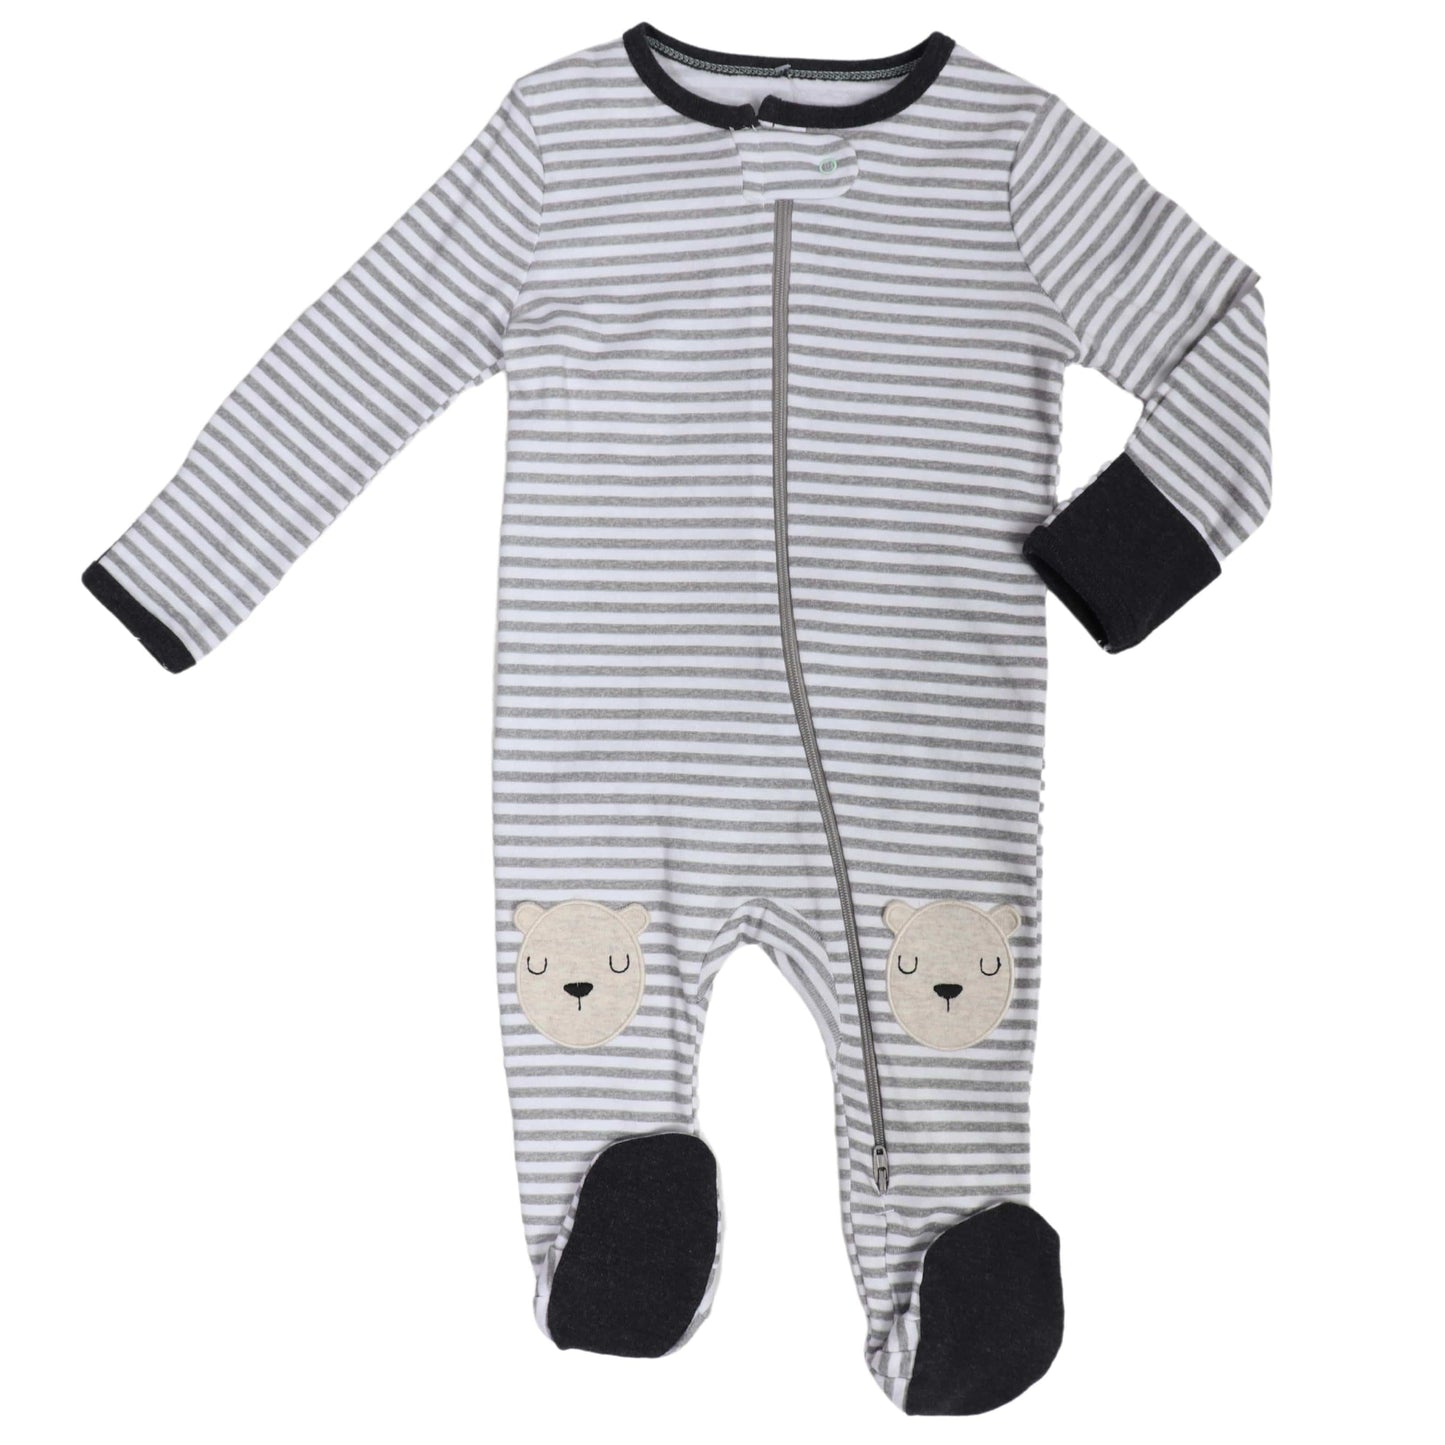 CLOUD ISLAND Baby Boy 6-9 Month / Multi-Color CLOUD ISLAND - Stripped Overall